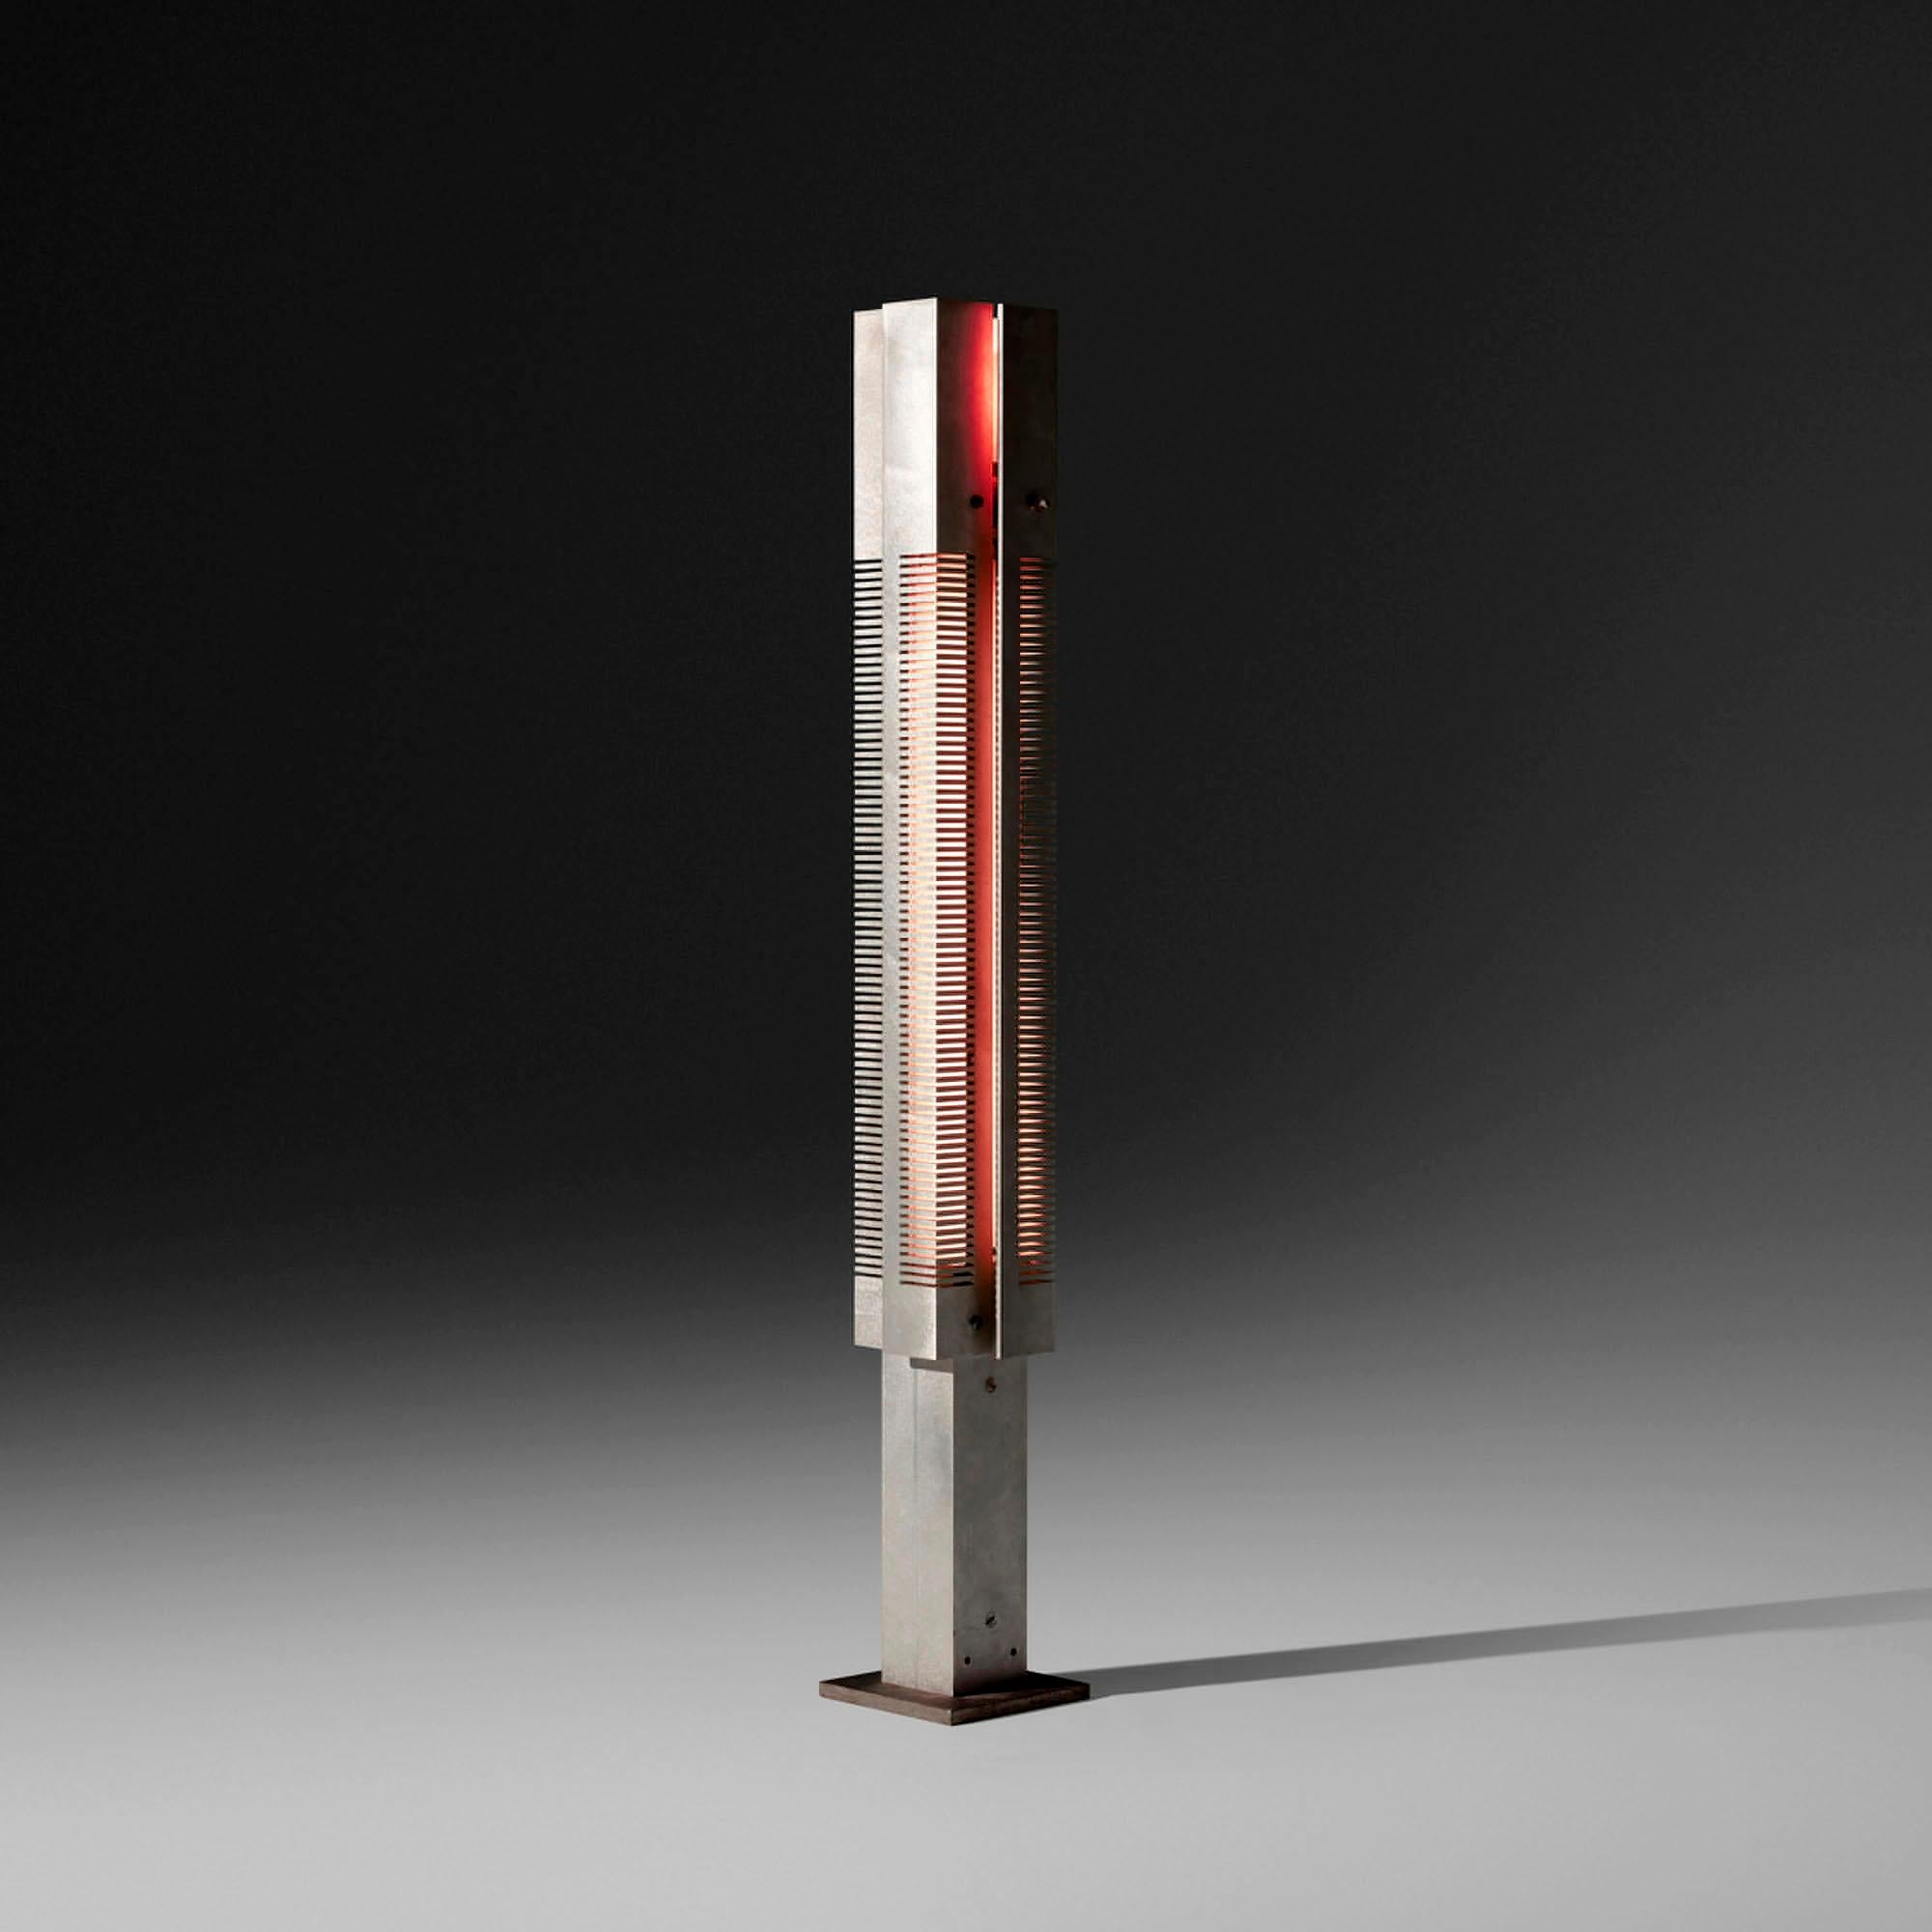 Serge Mouille - Medium Signal Floor Lamp in Silver In New Condition For Sale In Stratford, CT